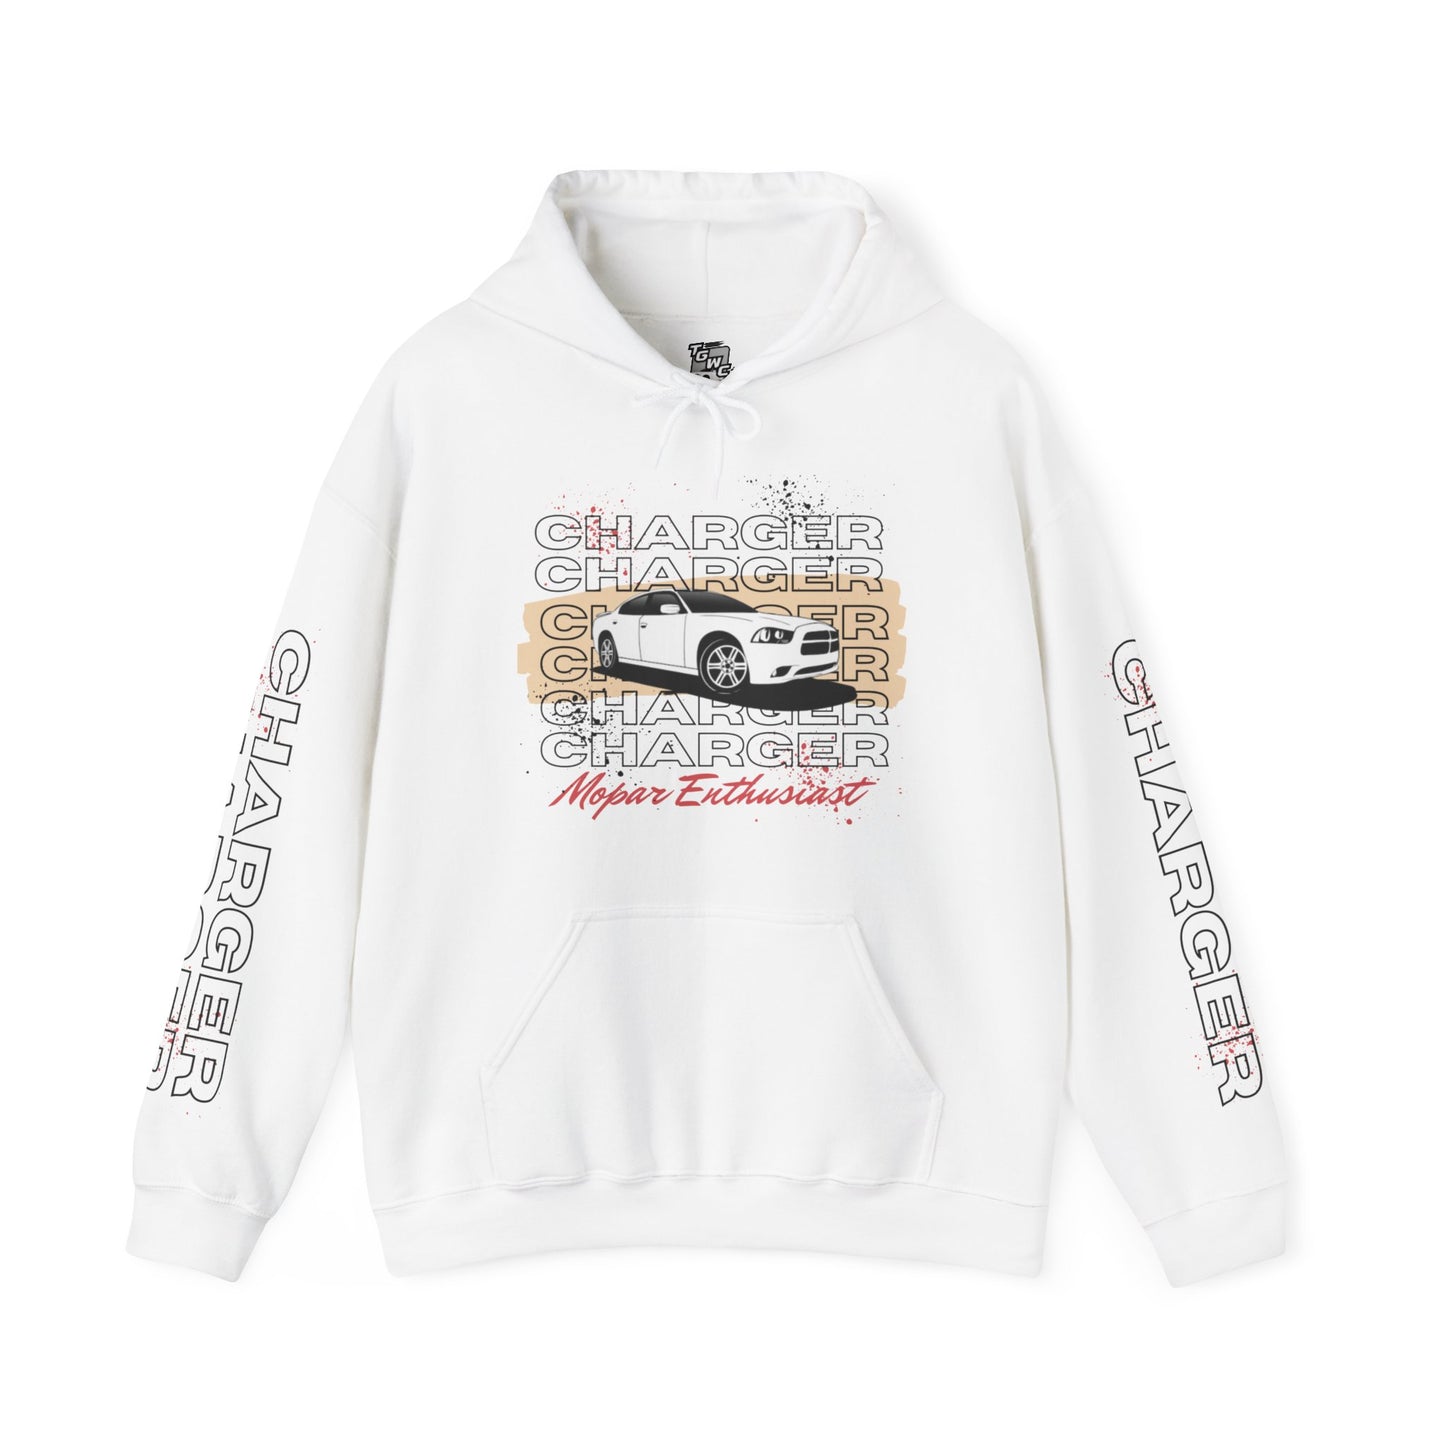 Dodge Charger, Mopar Enthusiast Hoodie by TGWC